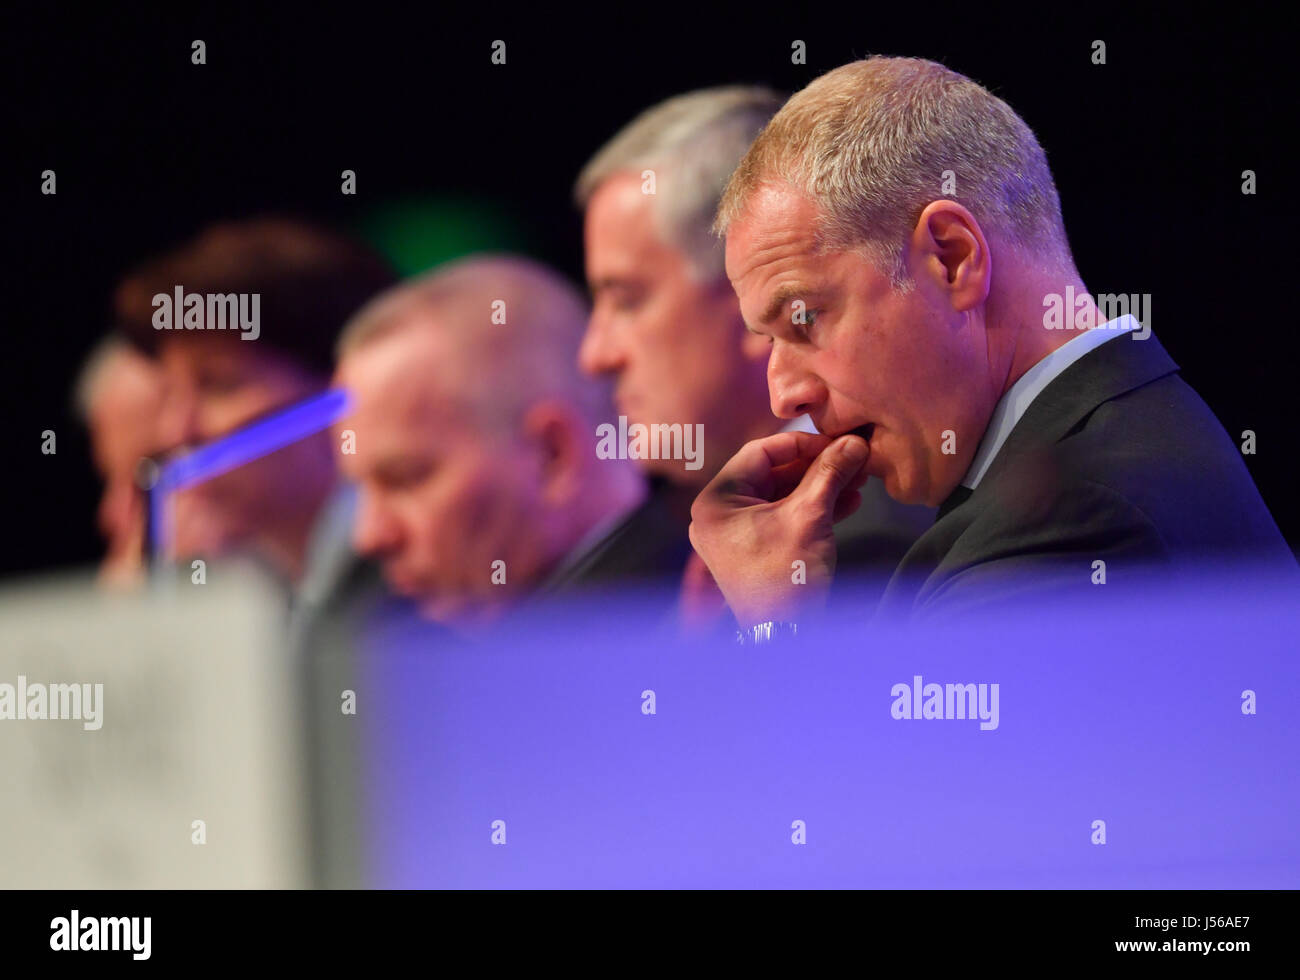 Frankfurt, Germany. 17th May, 2017. Carsten Kengeter (R), the CEO of Deutsche Boerse AG, with fellow board of directors members Jeffrey Tessler (L-R), Hauke Stars, Andreas Preuss and Gregor Pottmeyer at the company's annual general meeting in Frankfurt am Main, Germany, 17 May 2017. Credit: dpa picture alliance/Alamy Live News Stock Photo